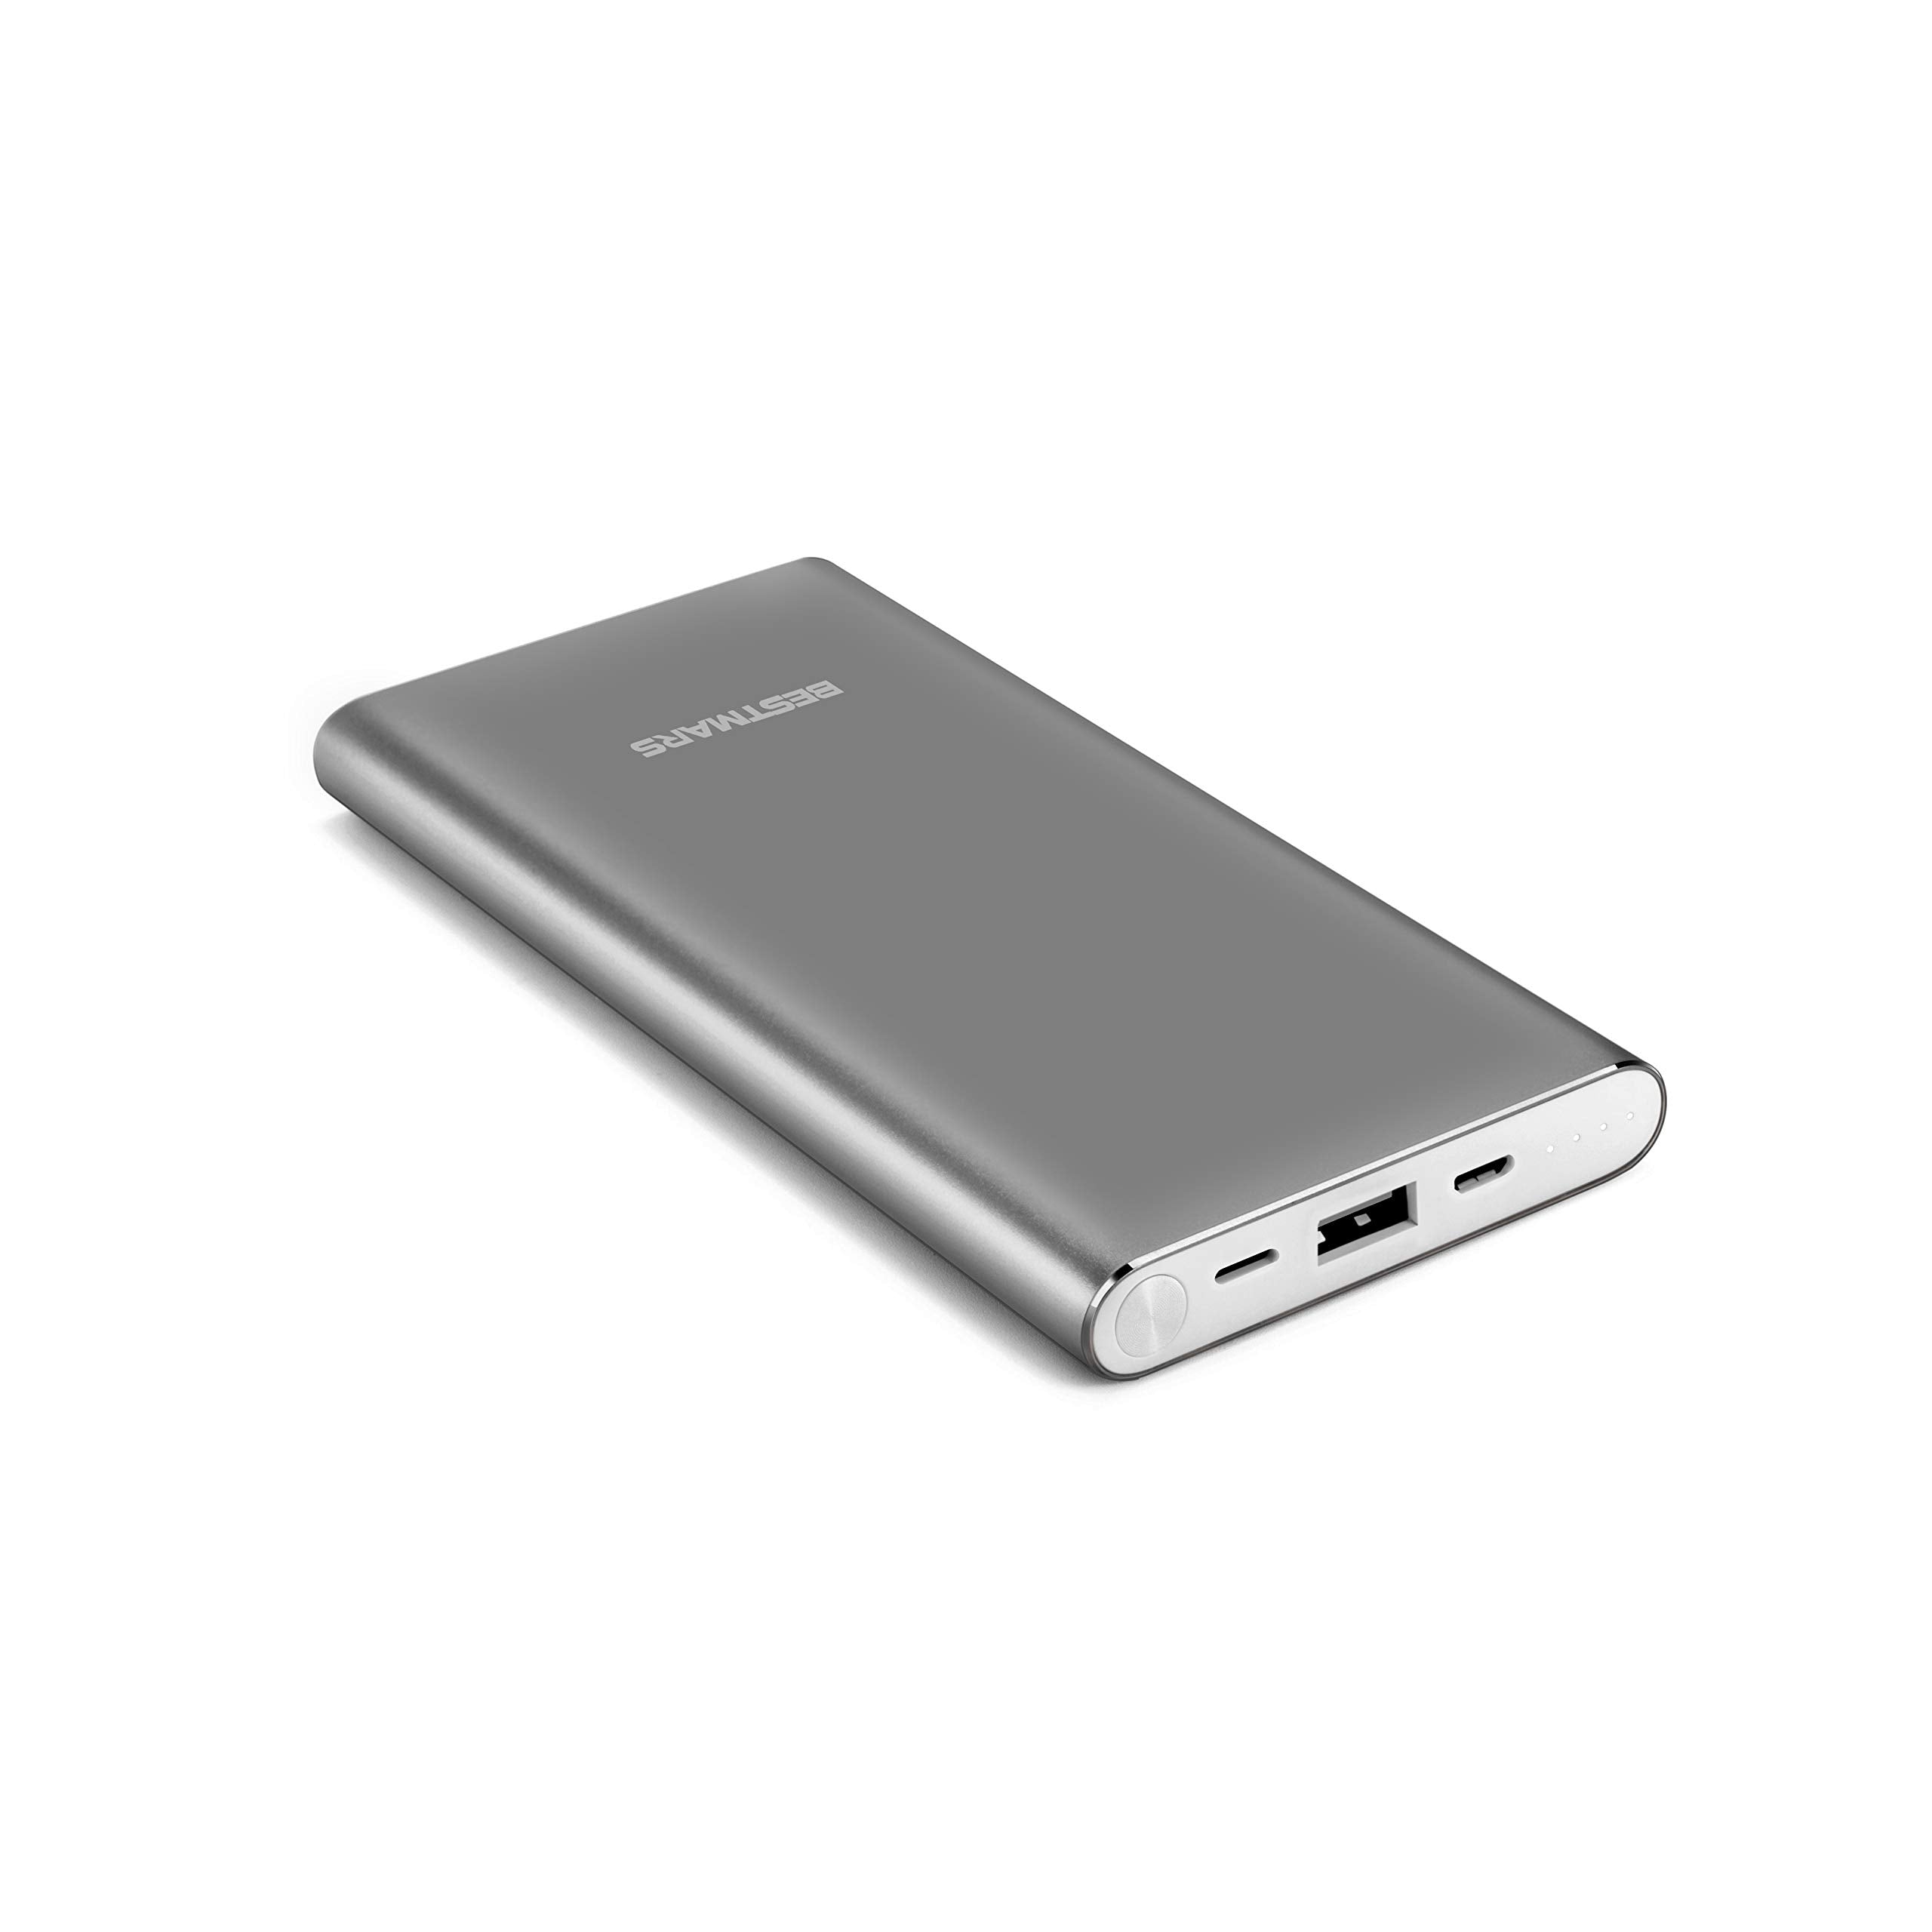 High Capacity 10000mAh Quick Charge QC 3.0 Portable Charger Fast Charging Slim Thin Ultra-Compact Power Bank Compatible For iPhone iPad Samsung Galaxy Cell phone & Google Android Smartphone Space Grey